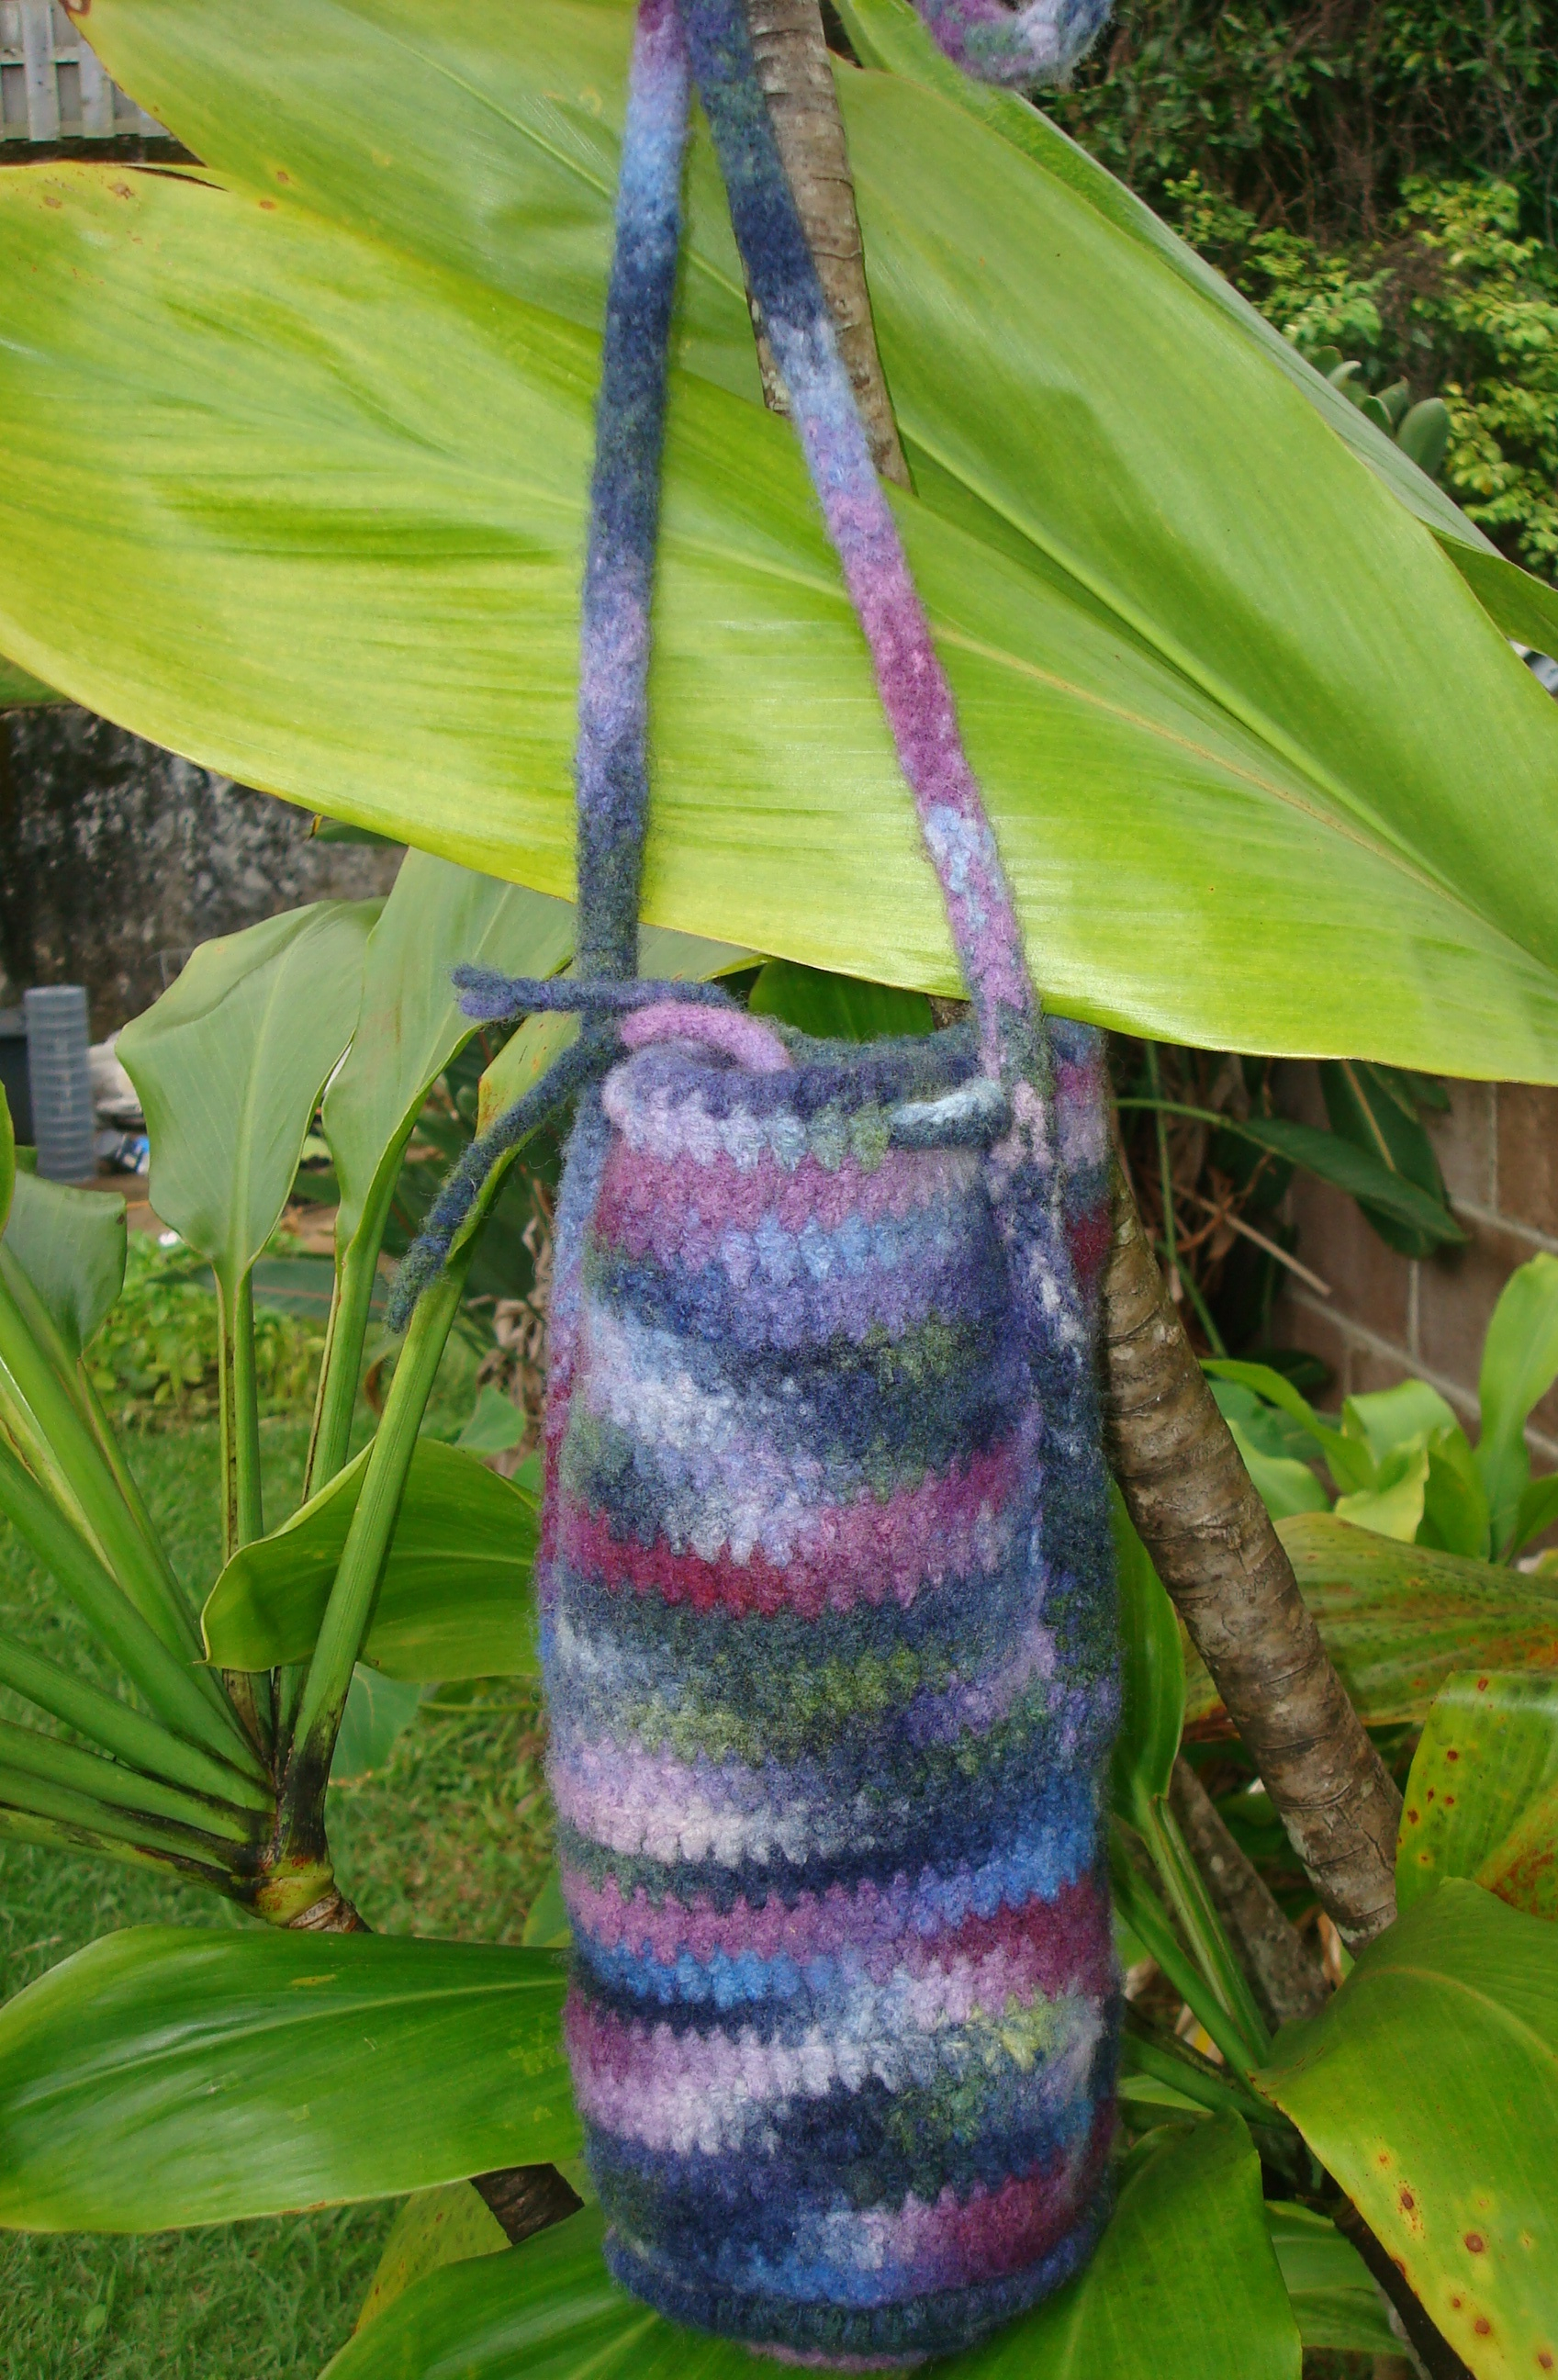 Crochet Bottle Holder Pattern A New Crochet Pattern Is Now Available In Amazons Kindle Store